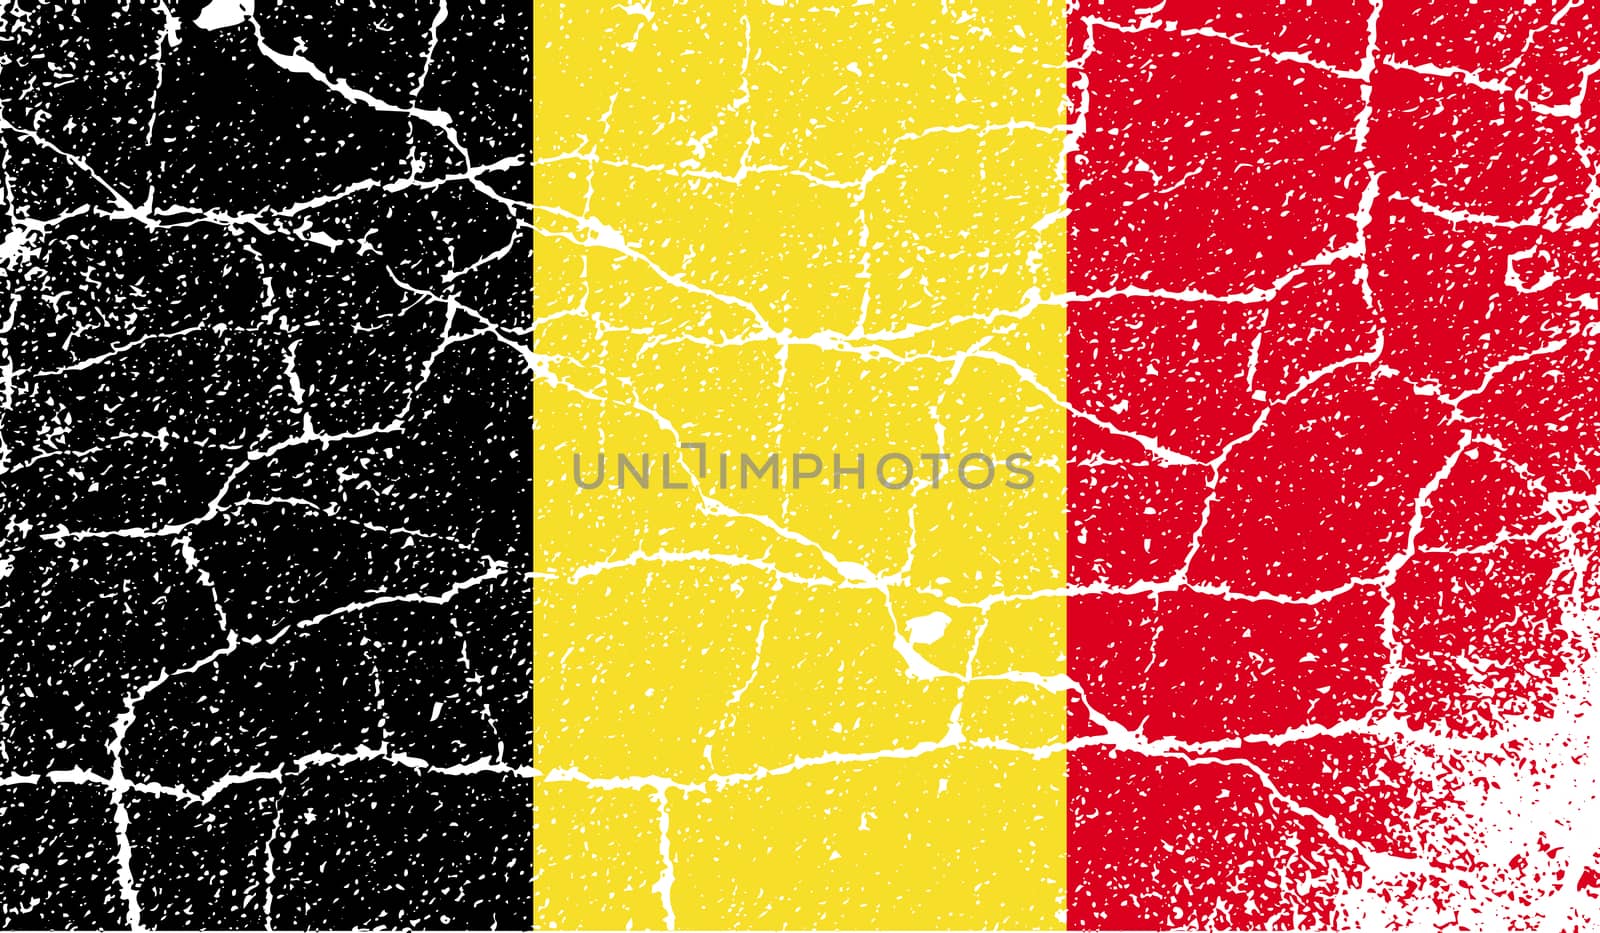 Flag of Belgium with old texture.  illustration